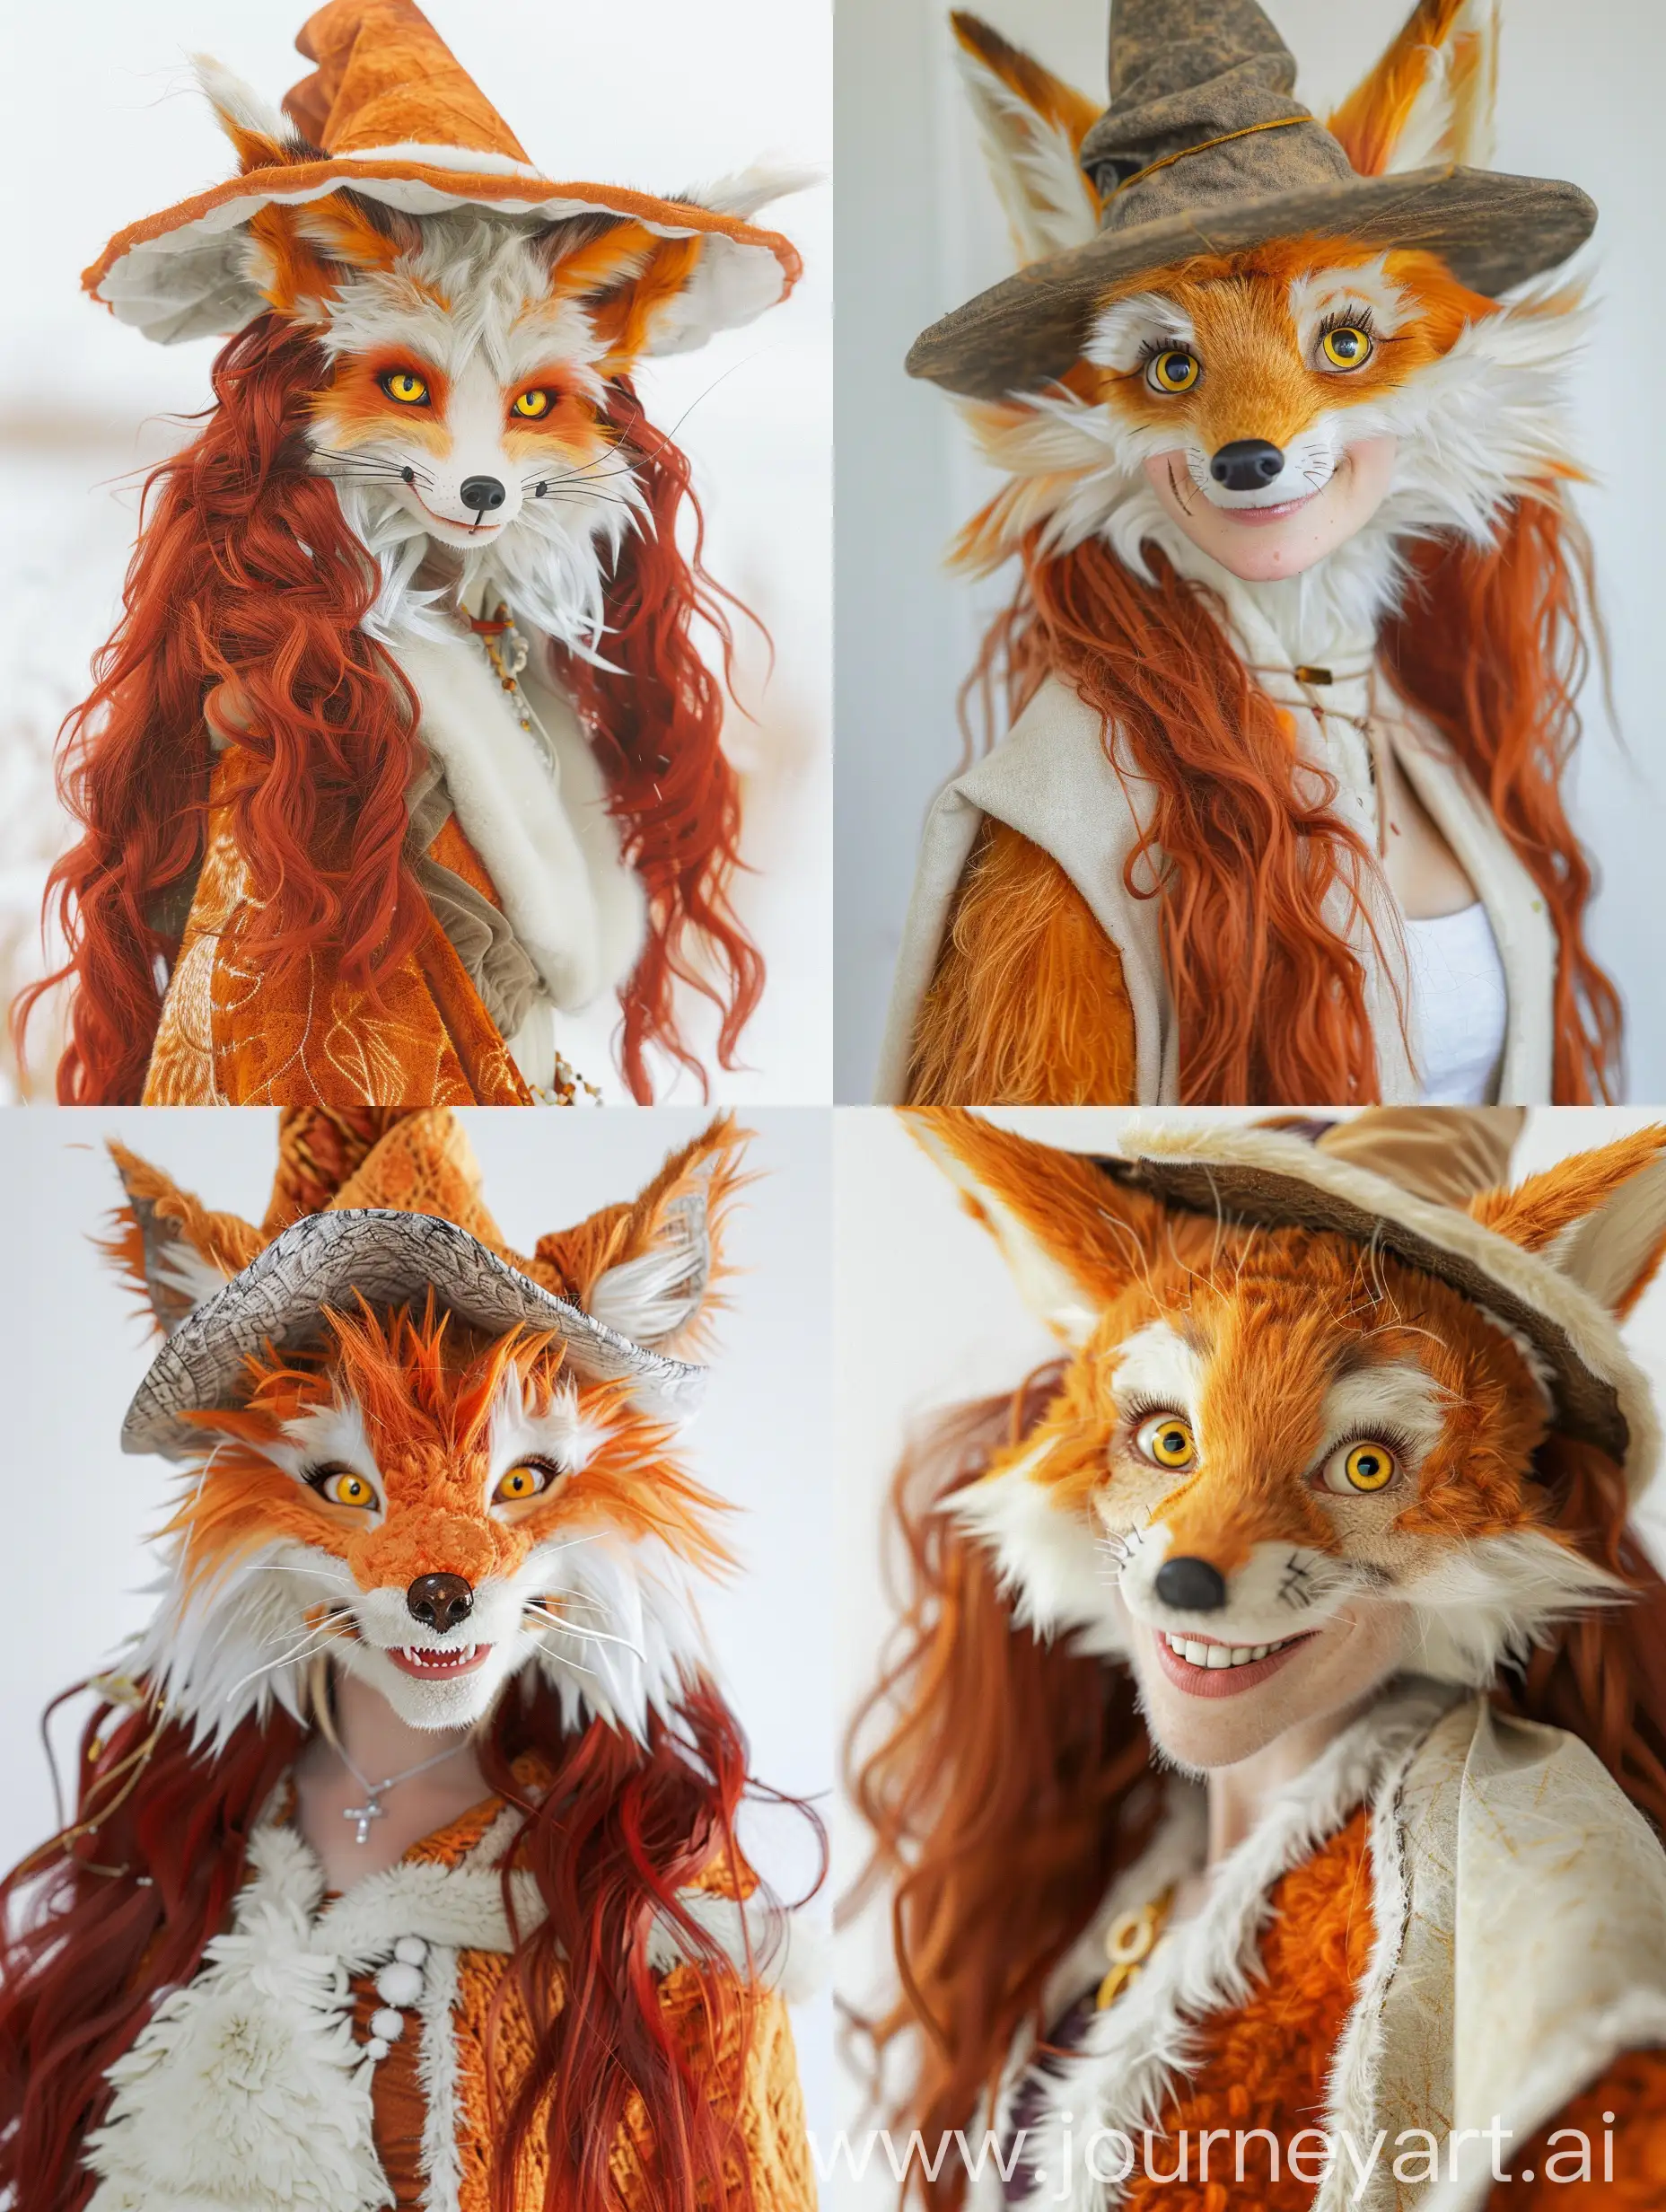 Middle Ages, village,fantasy,furry, magic, anime style, a woman on a white background
, a tall beautiful furry fox with a magician's mantle, a big magician's hat, a sly smile, yellow eyes, orange and white wool, long red wavy hair, adult, fluffy wool
Face up close, detailed, anime, cute